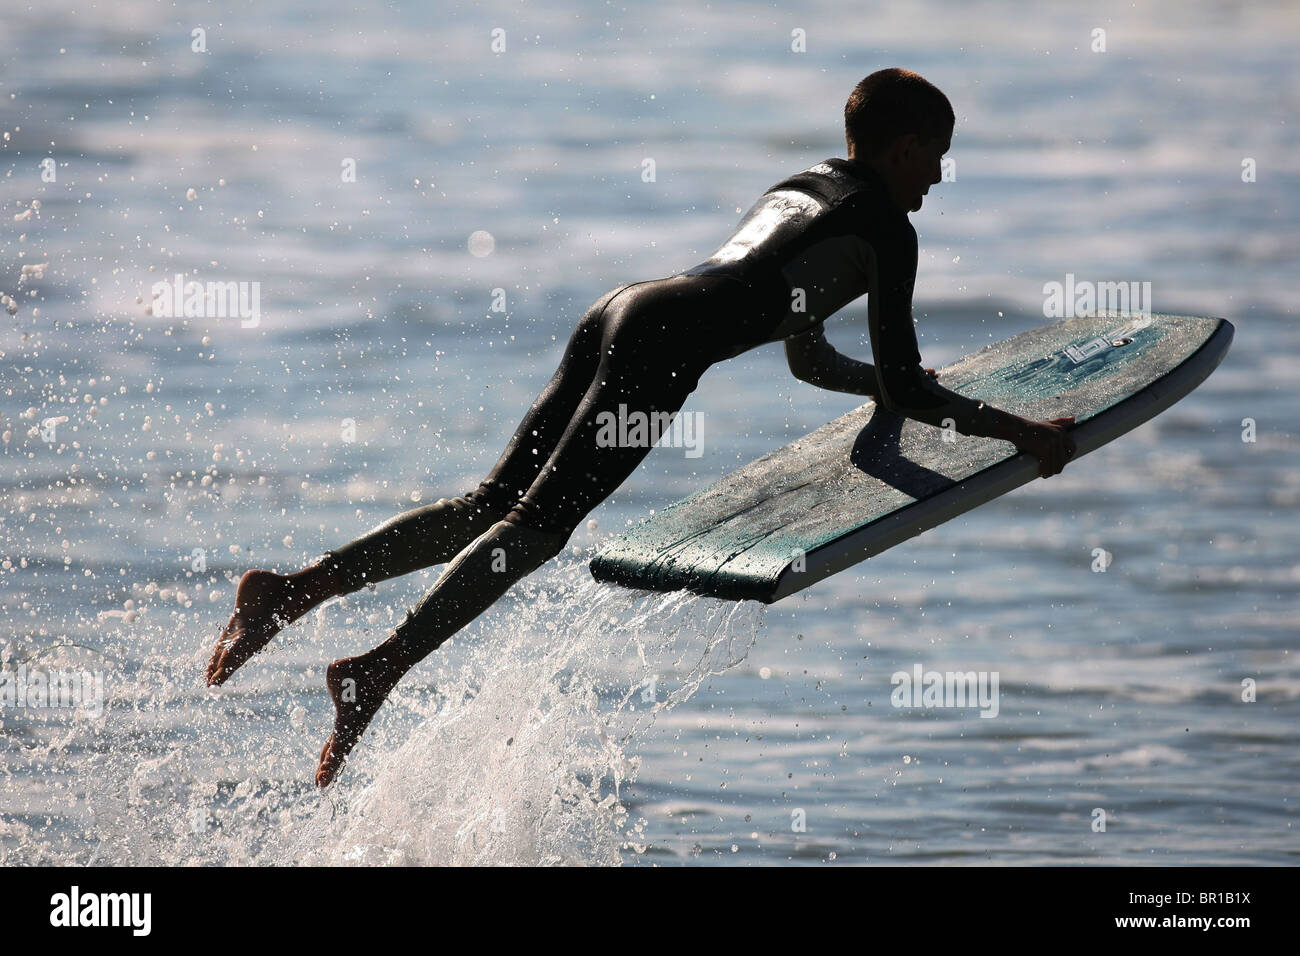 Boy plays in waves on wakeboard Stock Photo